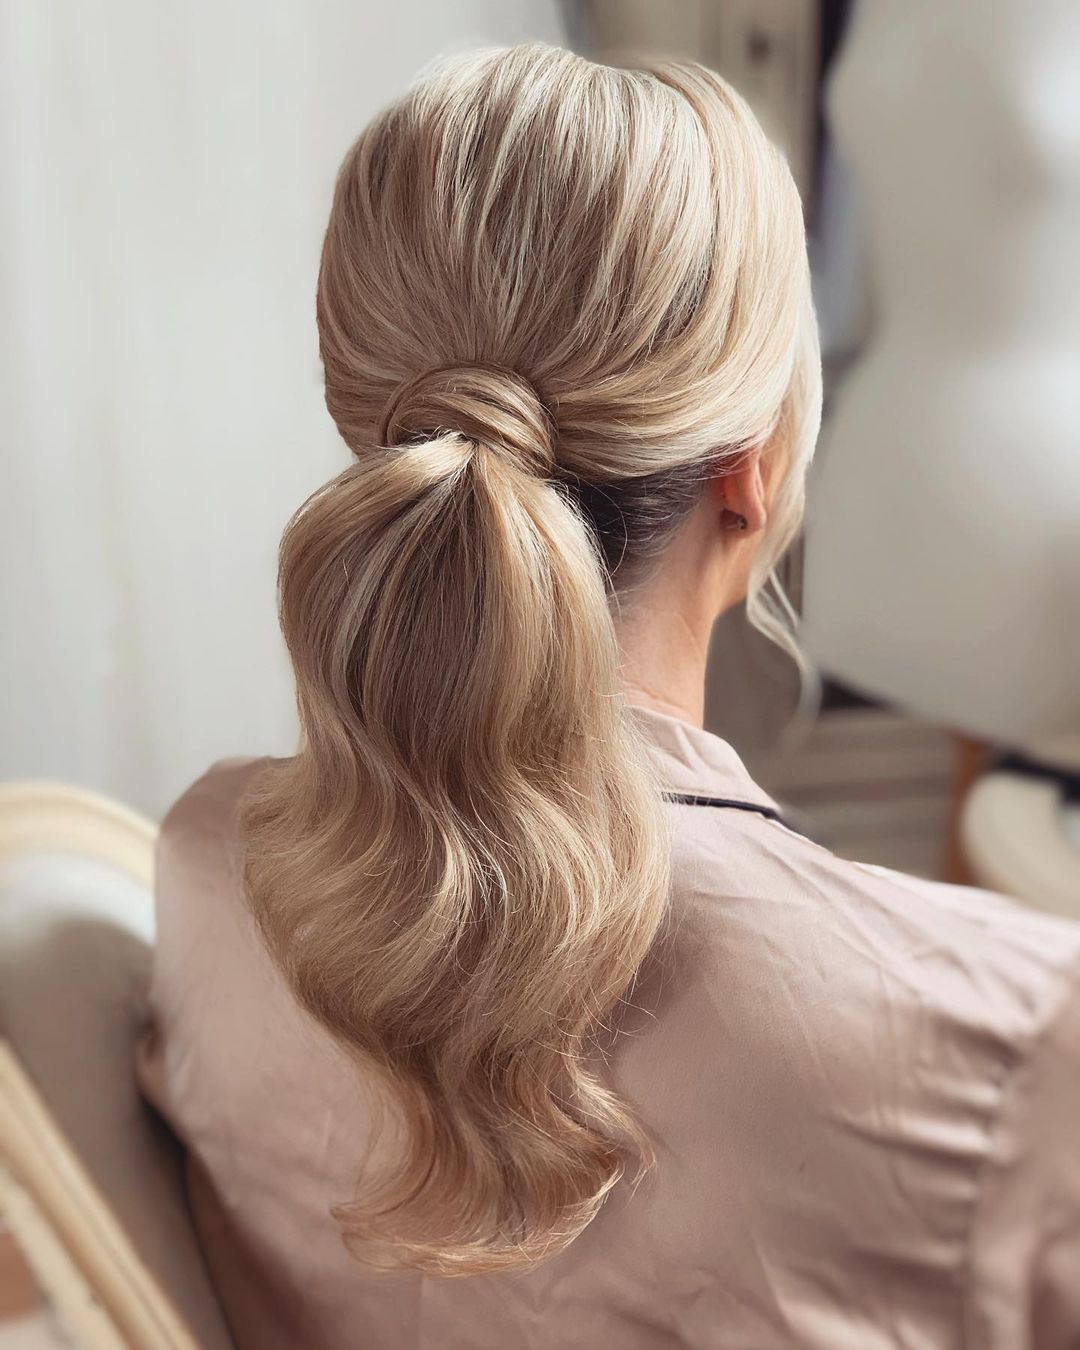 Prettiest High Ponytail Hairstyle To Try At Unice-Blog - | UNice.com